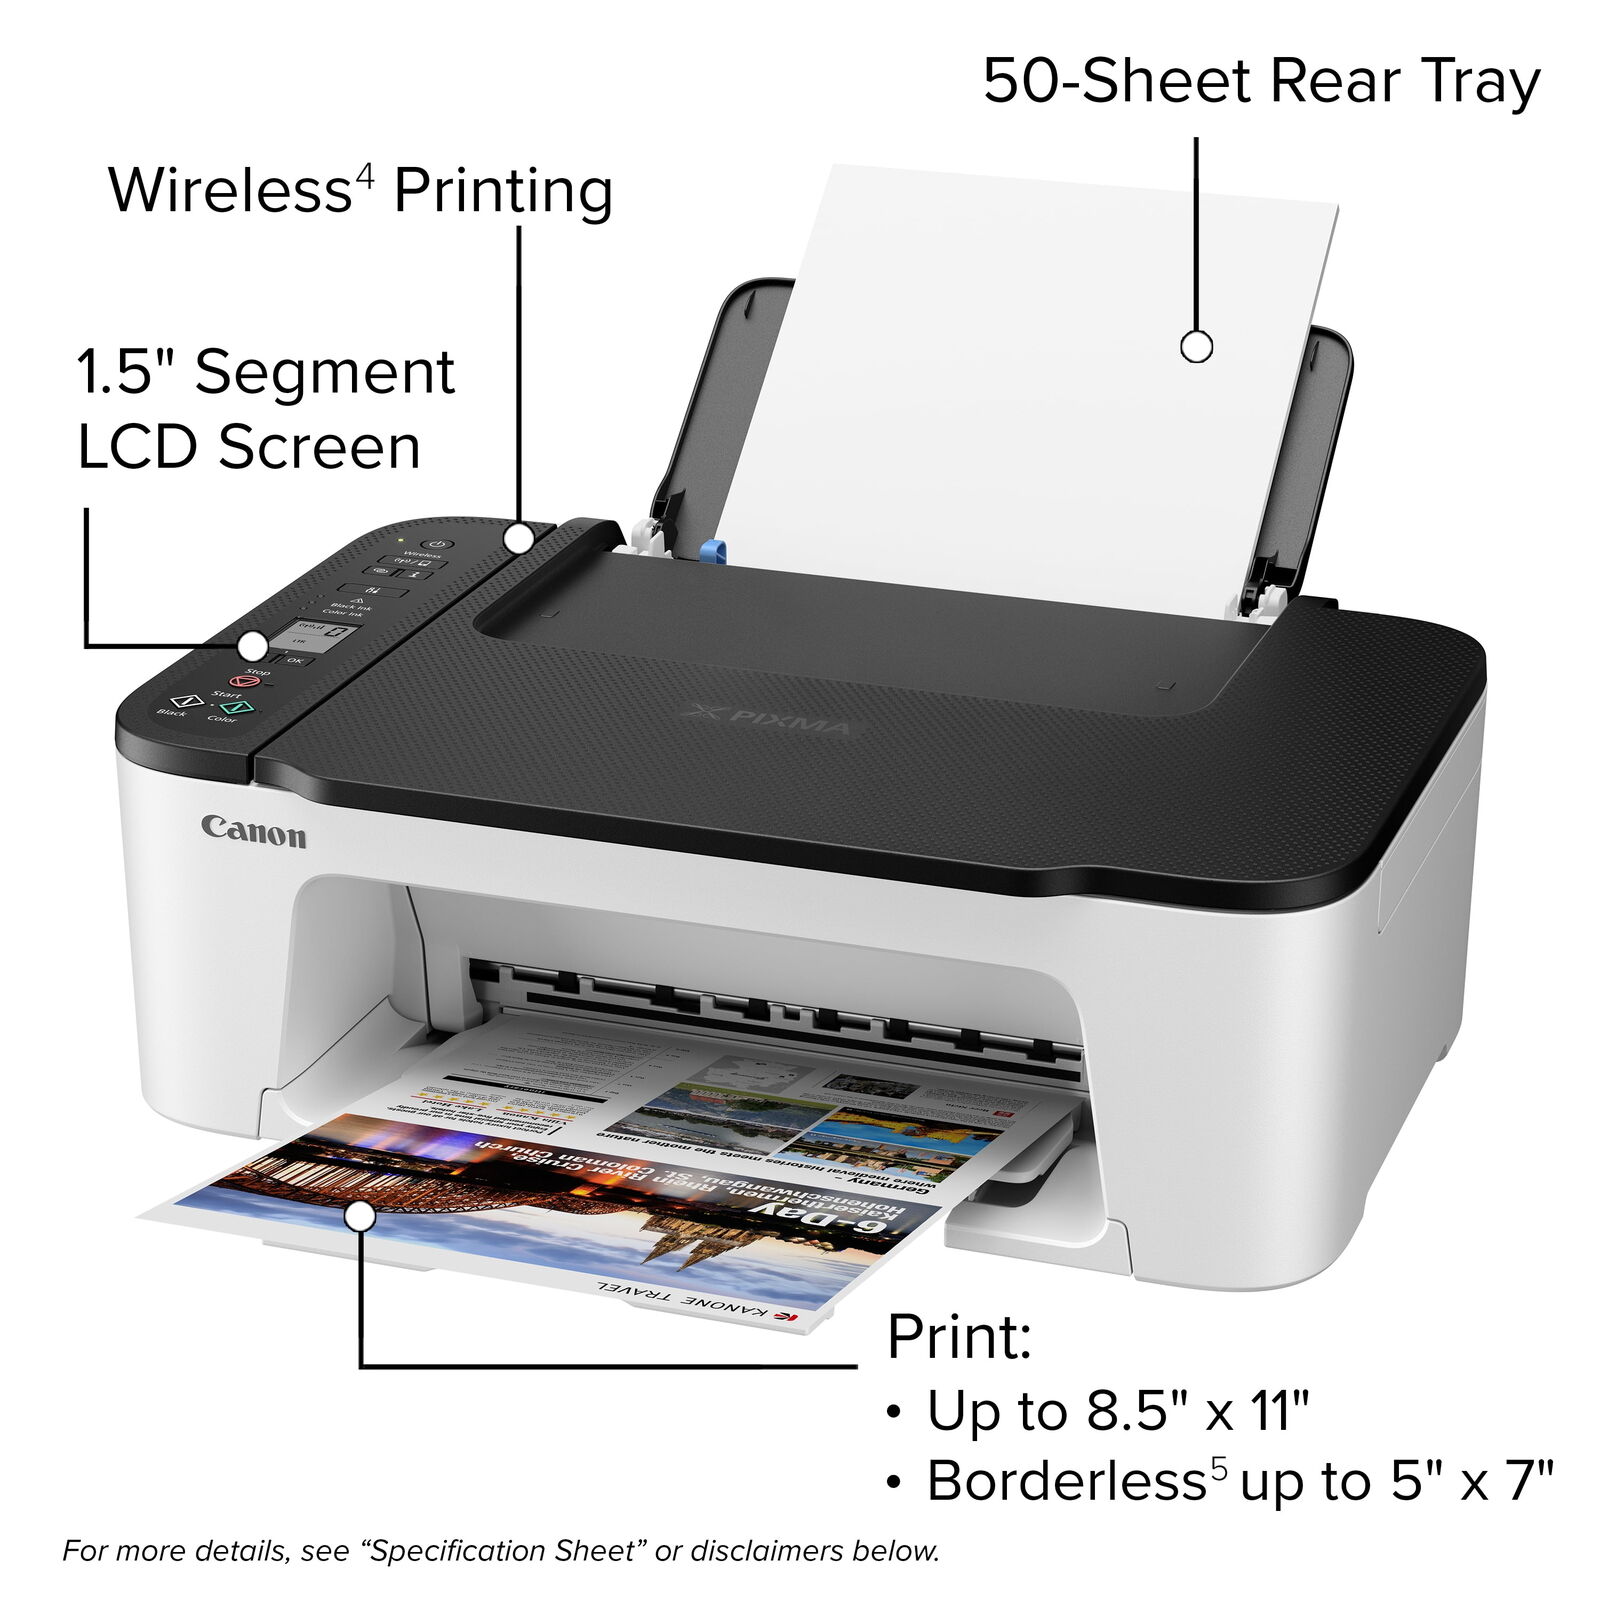 PIXMA TS3522 All-in-One Inkjet Wireless Scanner Printer with Ink included